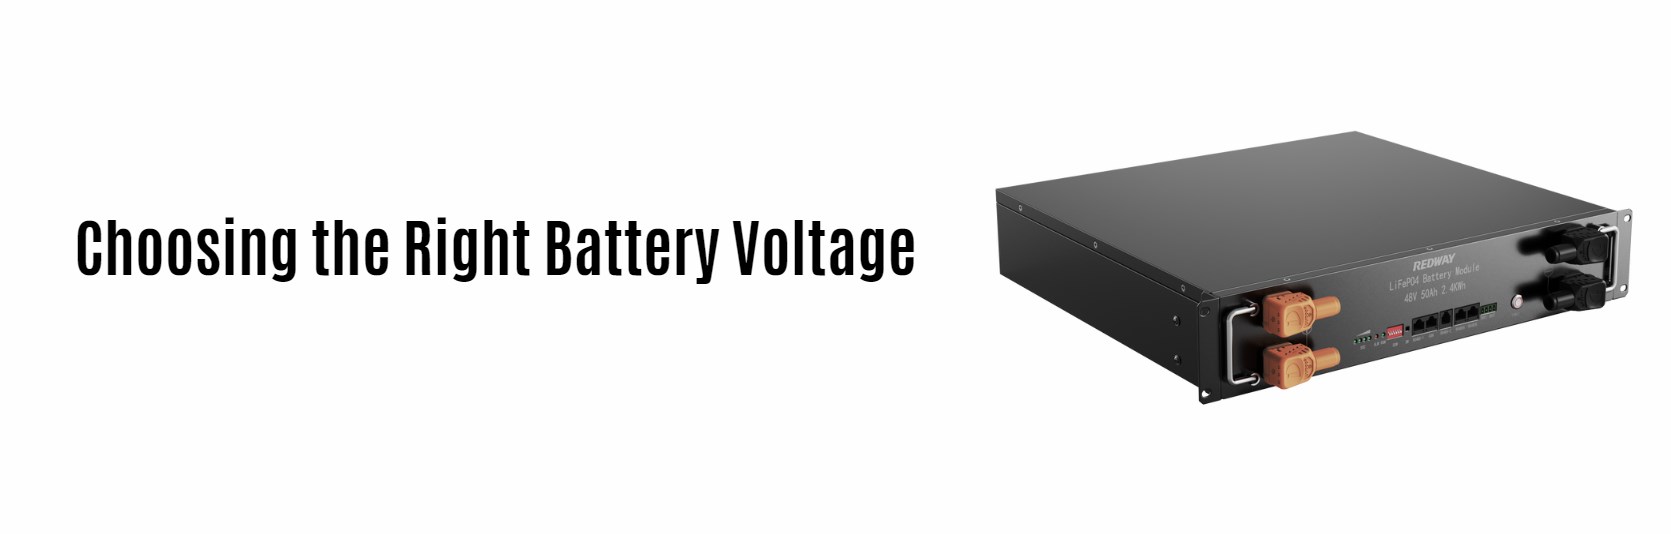 Choosing the Right Battery Voltage